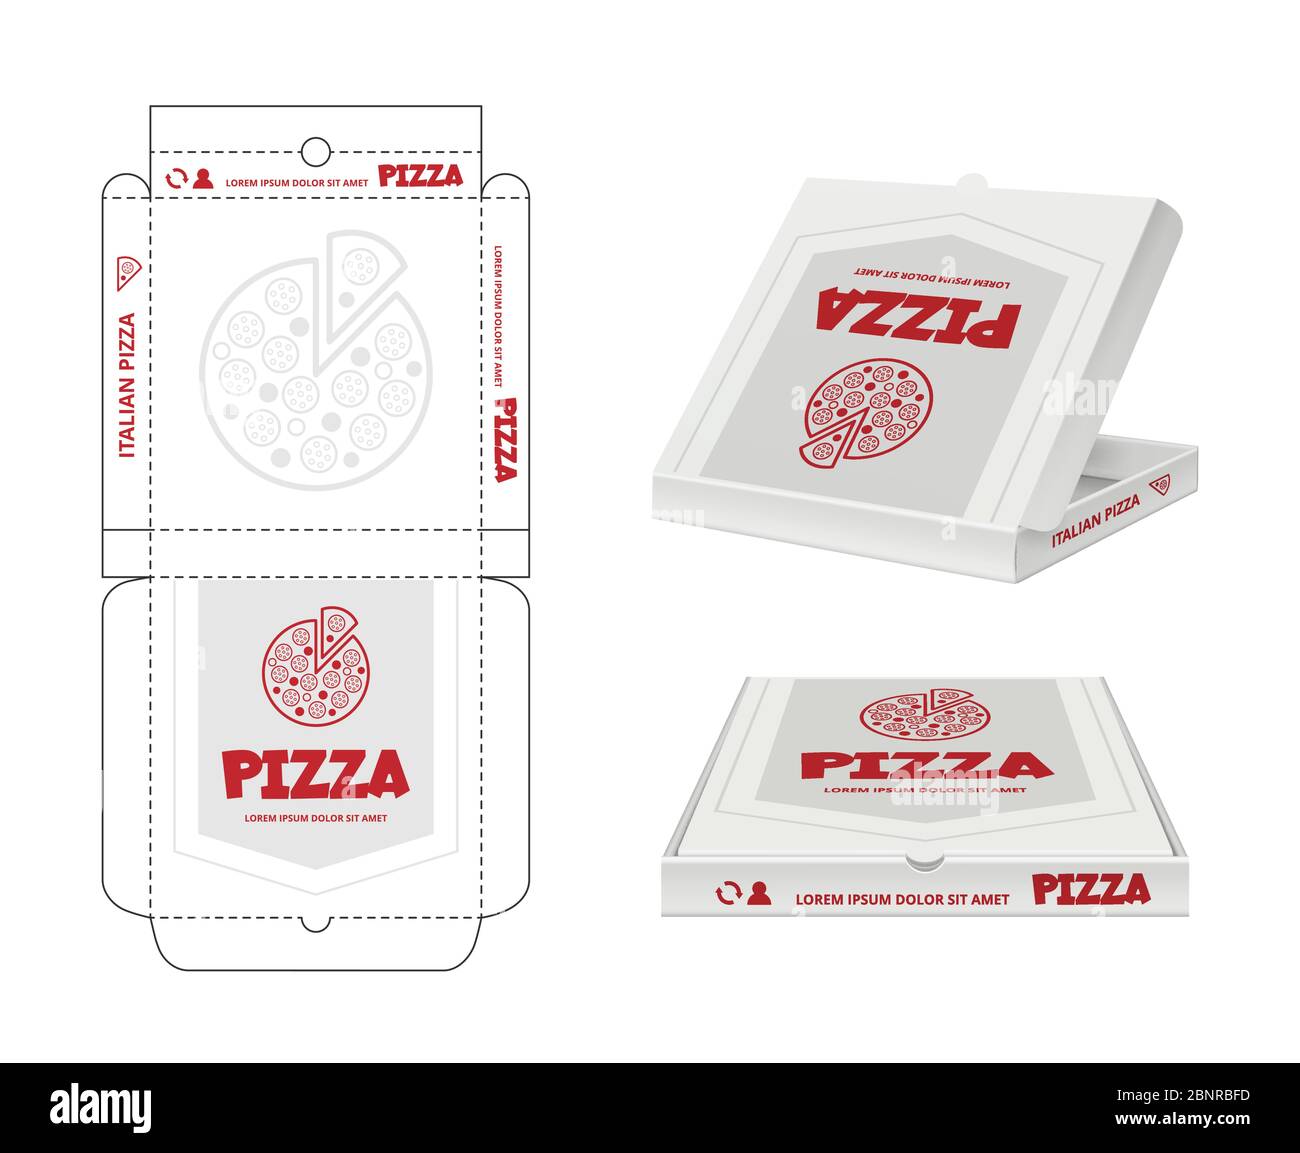 Pizza box design. Unwrap fastfood pizza package realistic template business identity vector Stock Vector